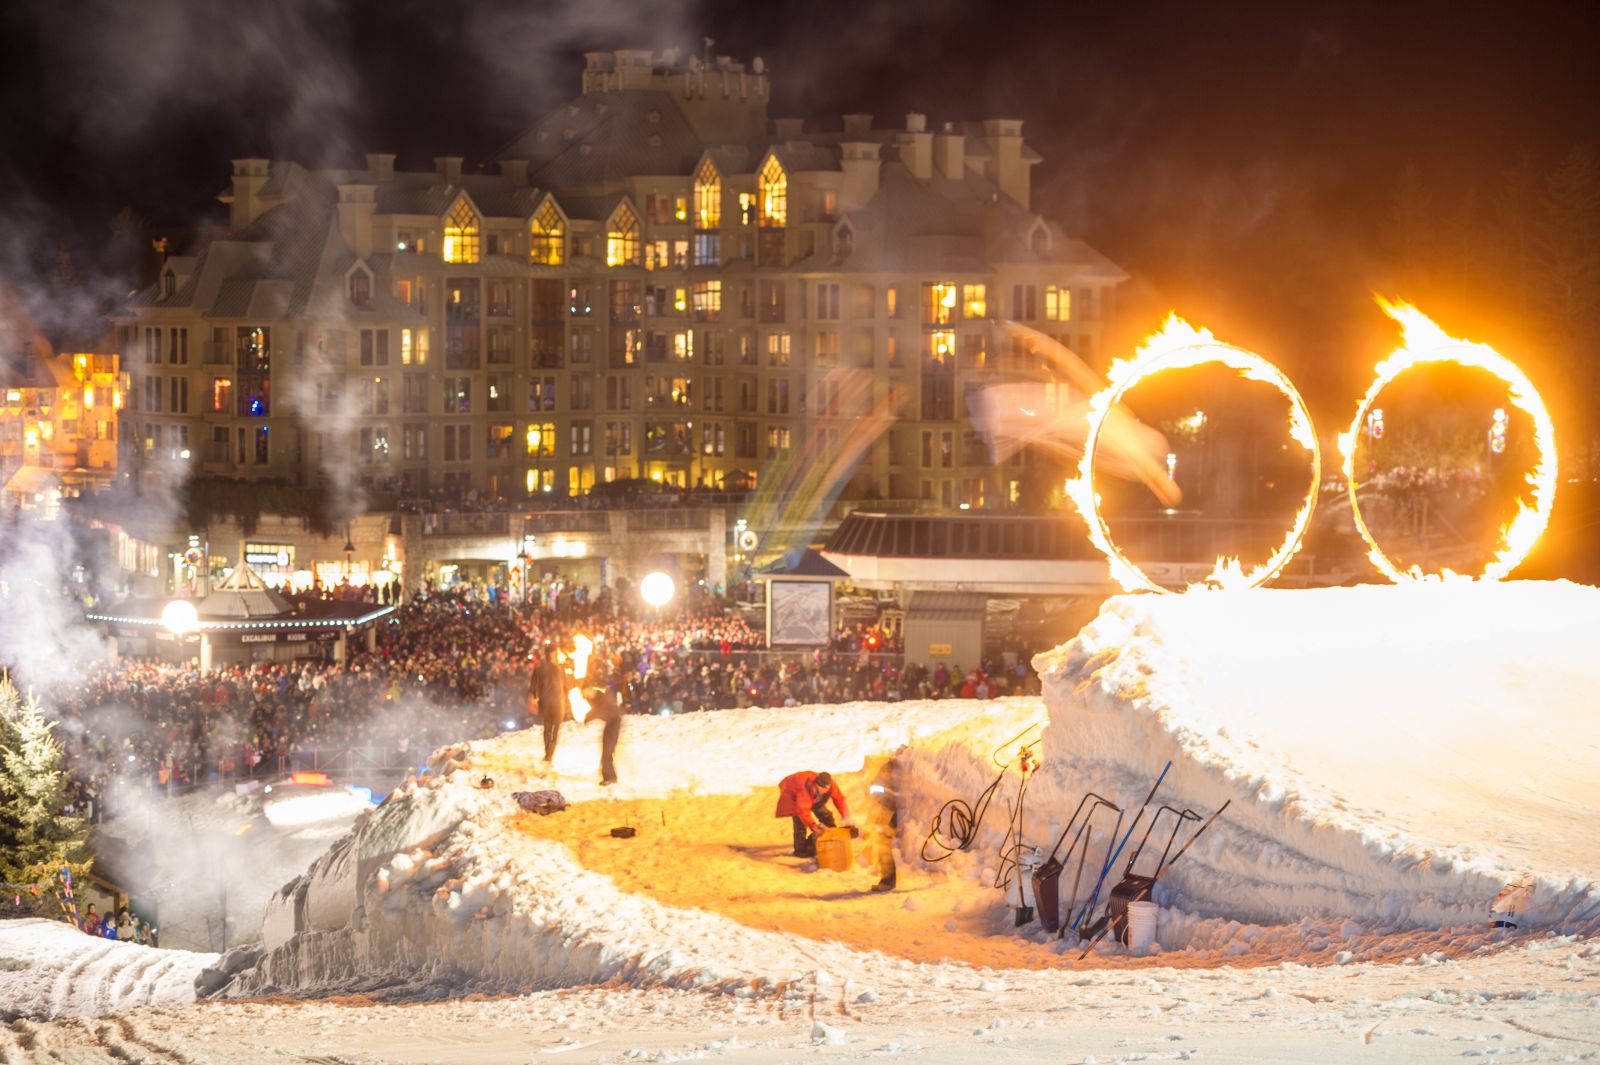 Whistler Fire & Ice Show